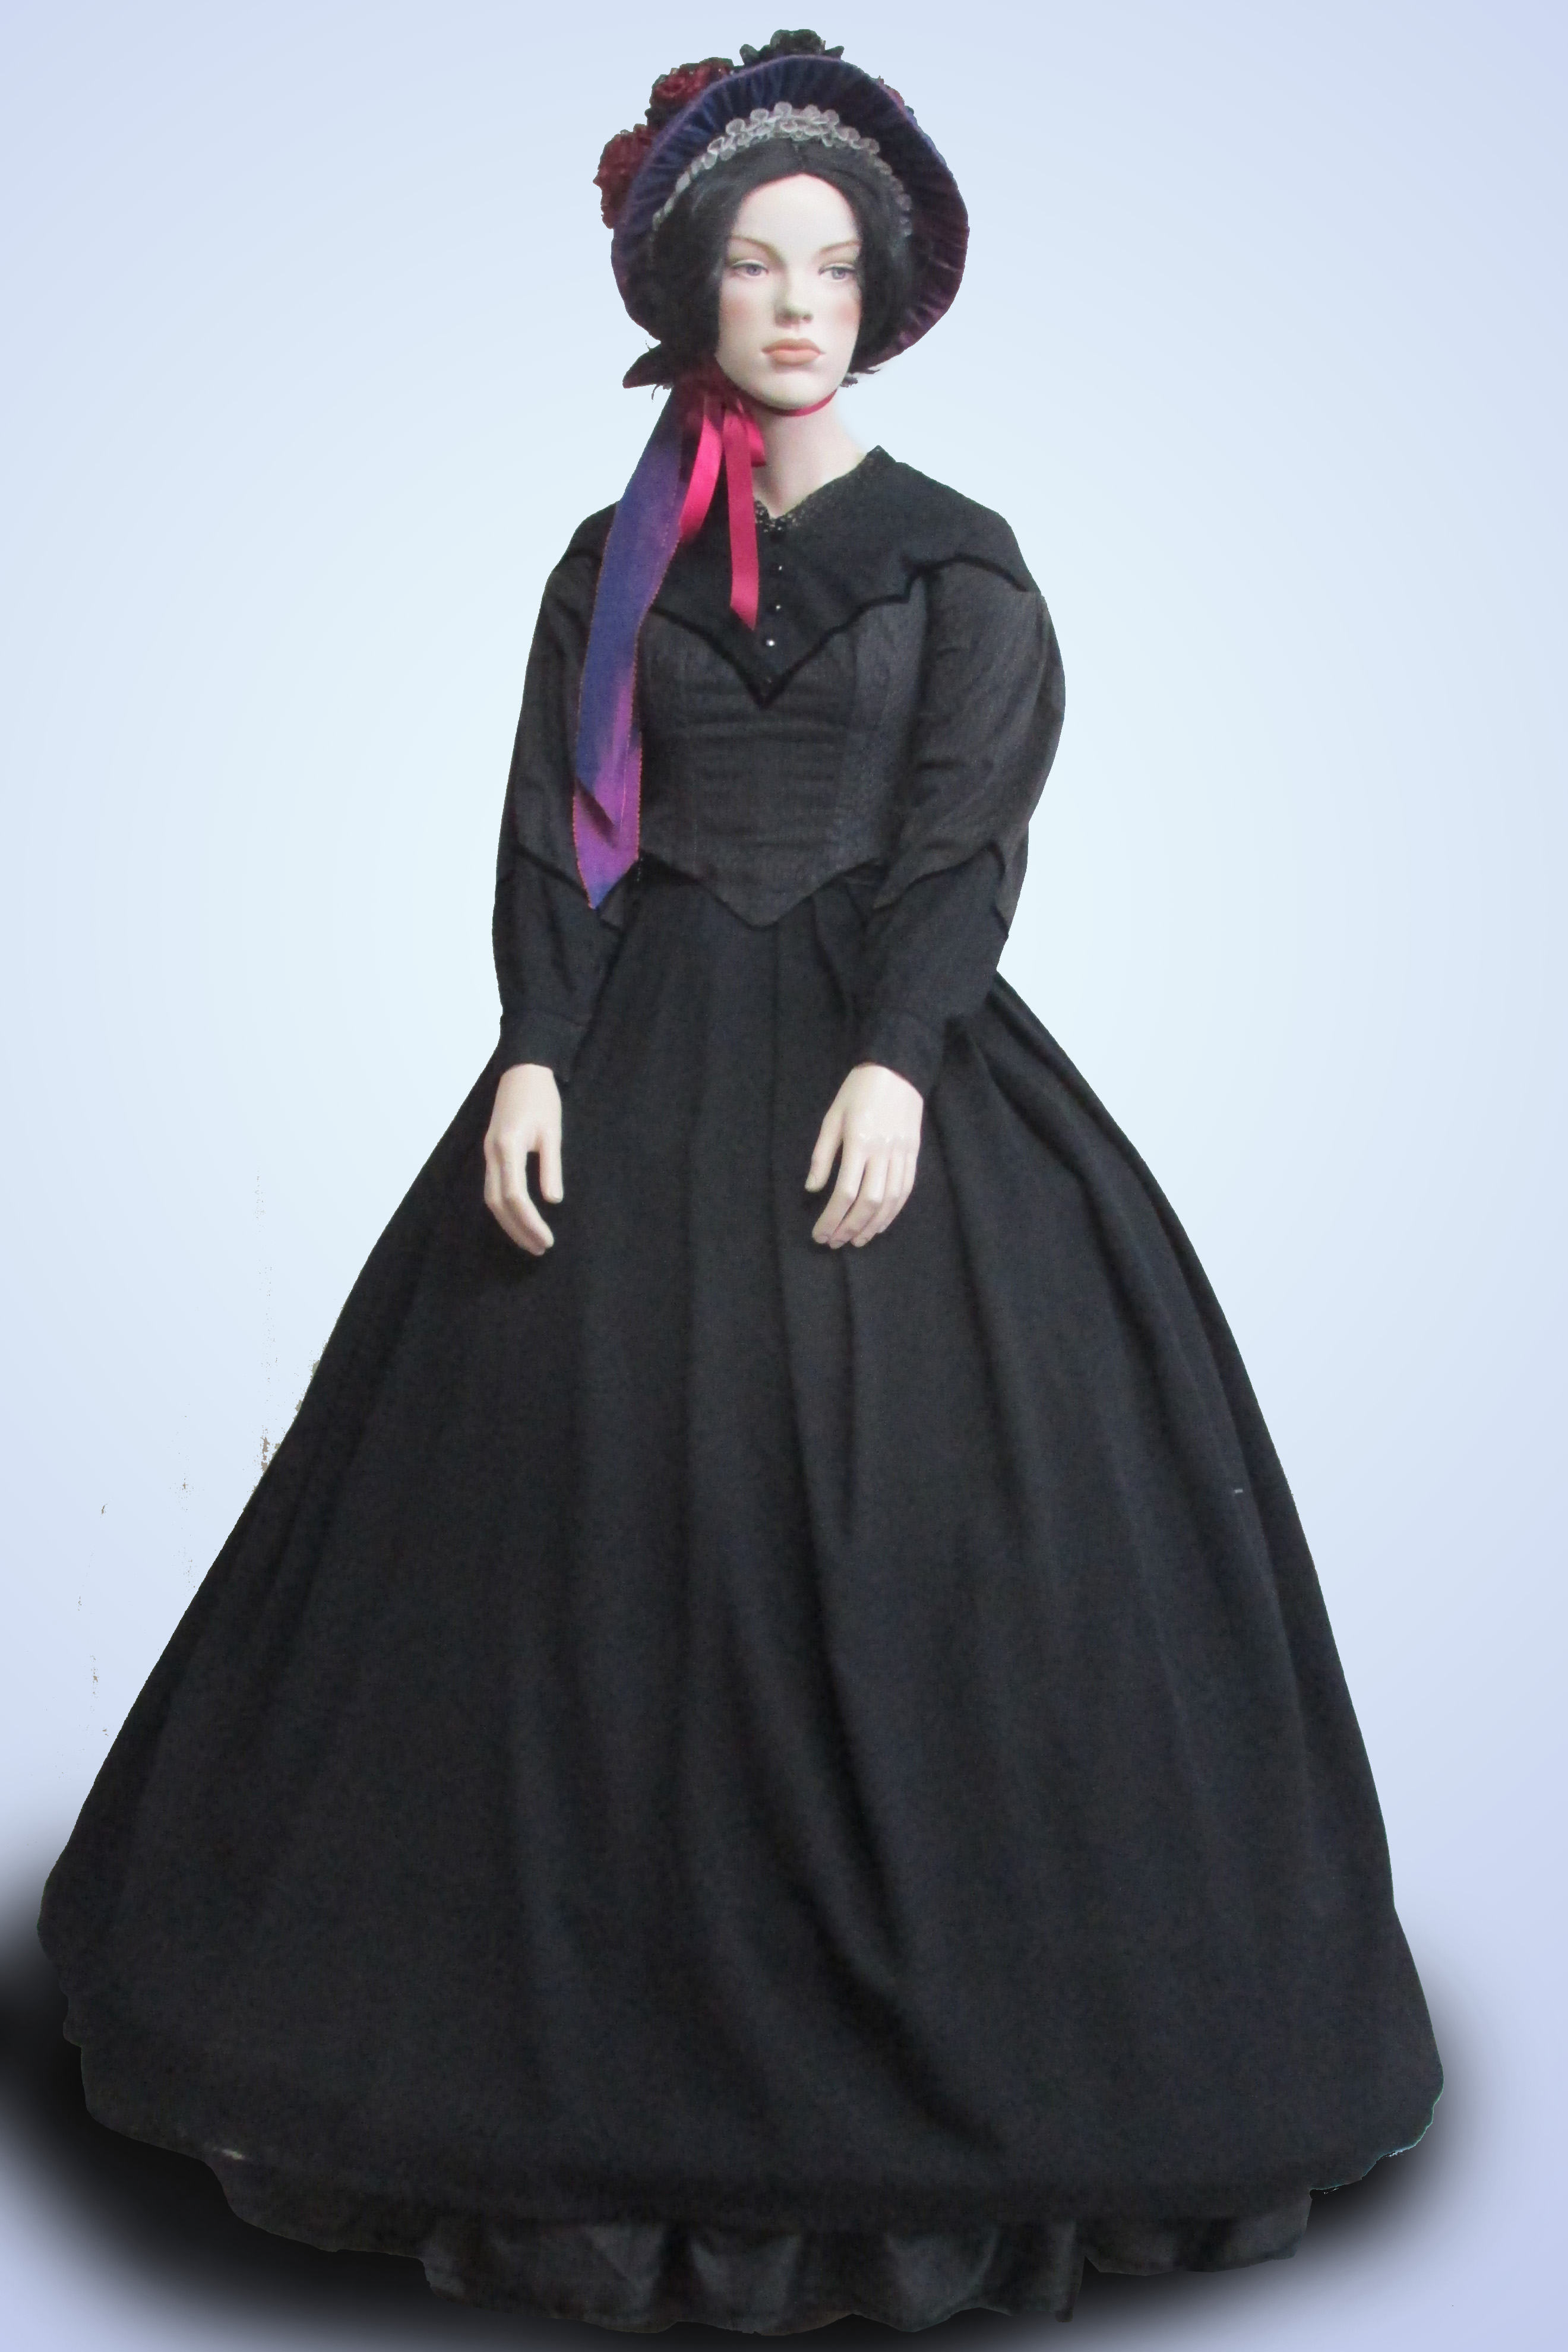 Black 2 Piece with Hoop and Bonnet Mid 1800s